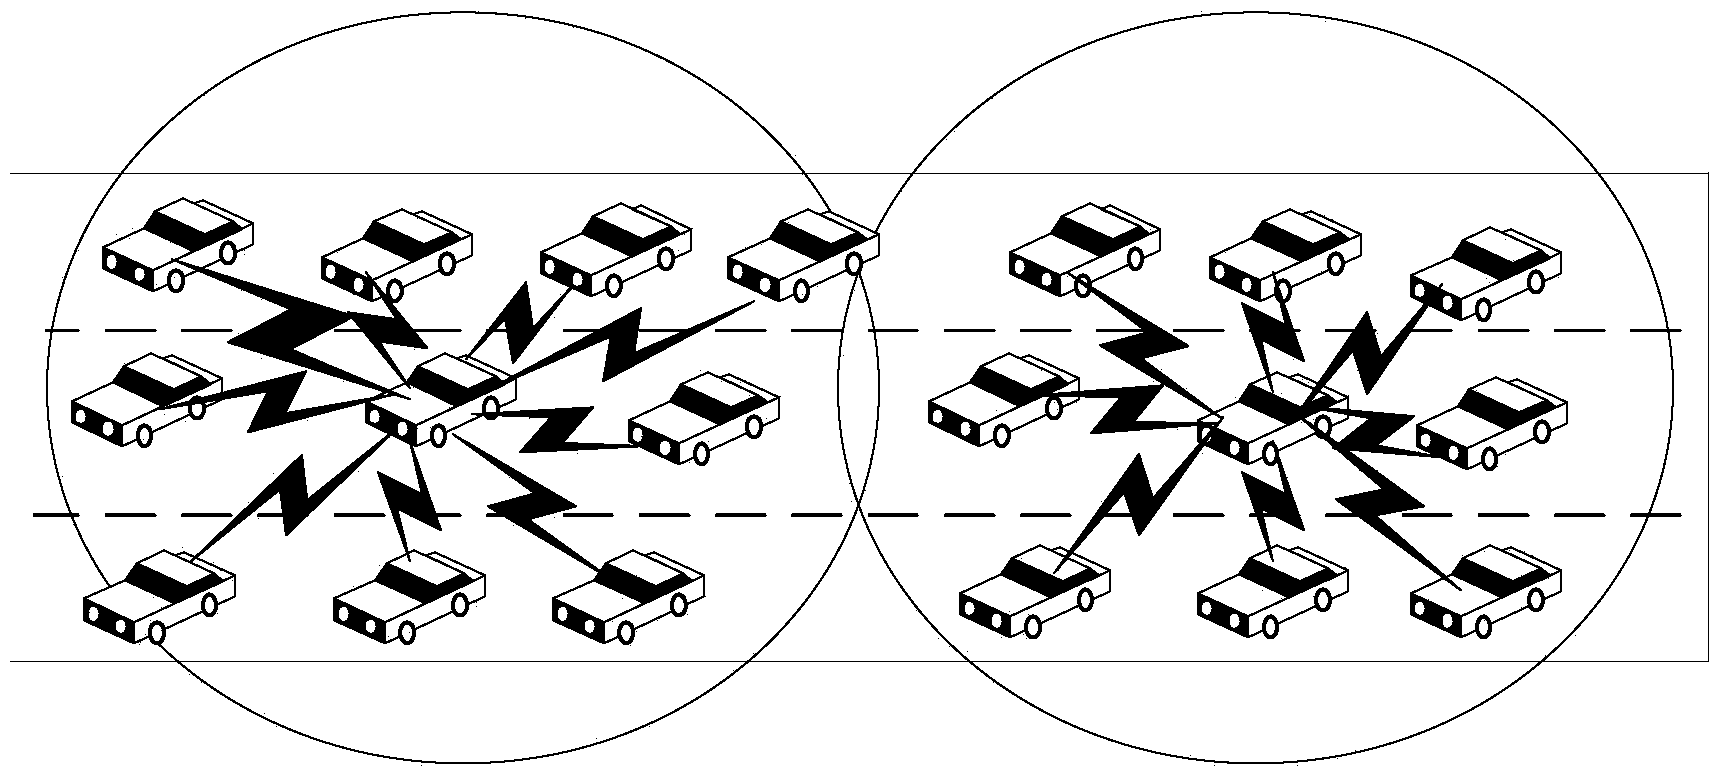 VANET clustering method combining historical credit of vehicle with current state of vehicle